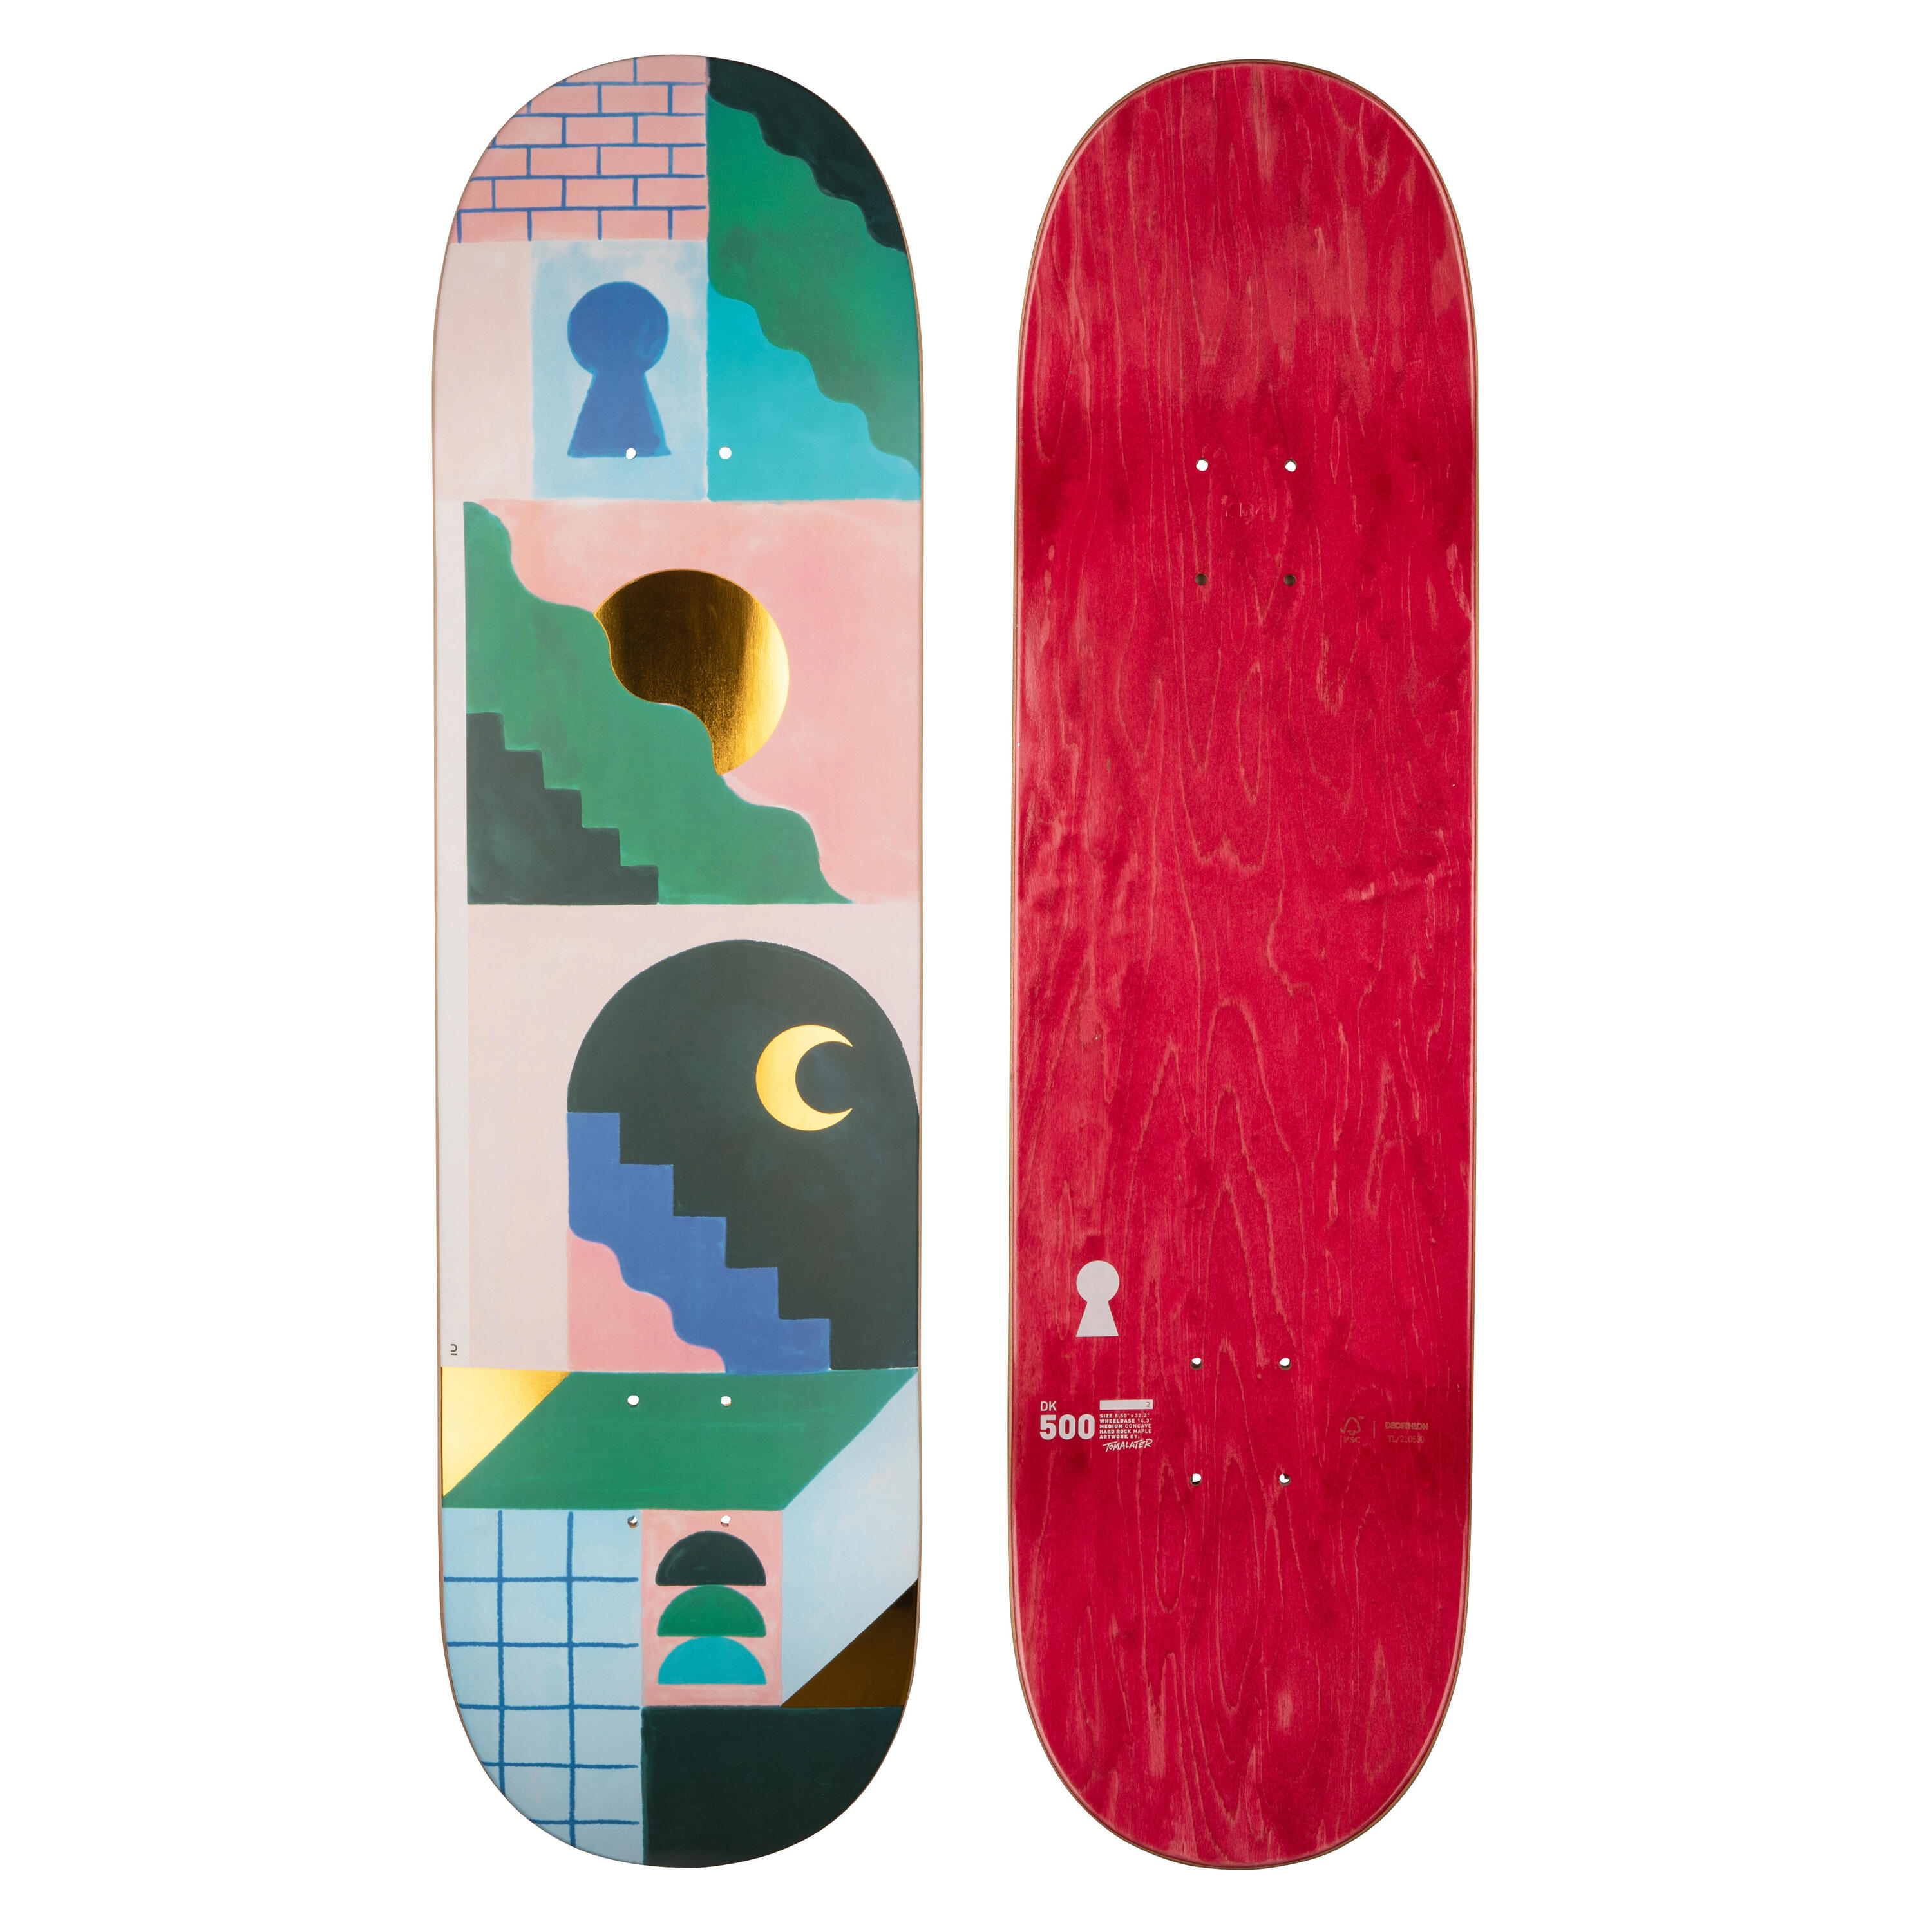 OXELO 8.5" Maple Popsicle Skateboard Deck DK500Graphics by @Tomalater